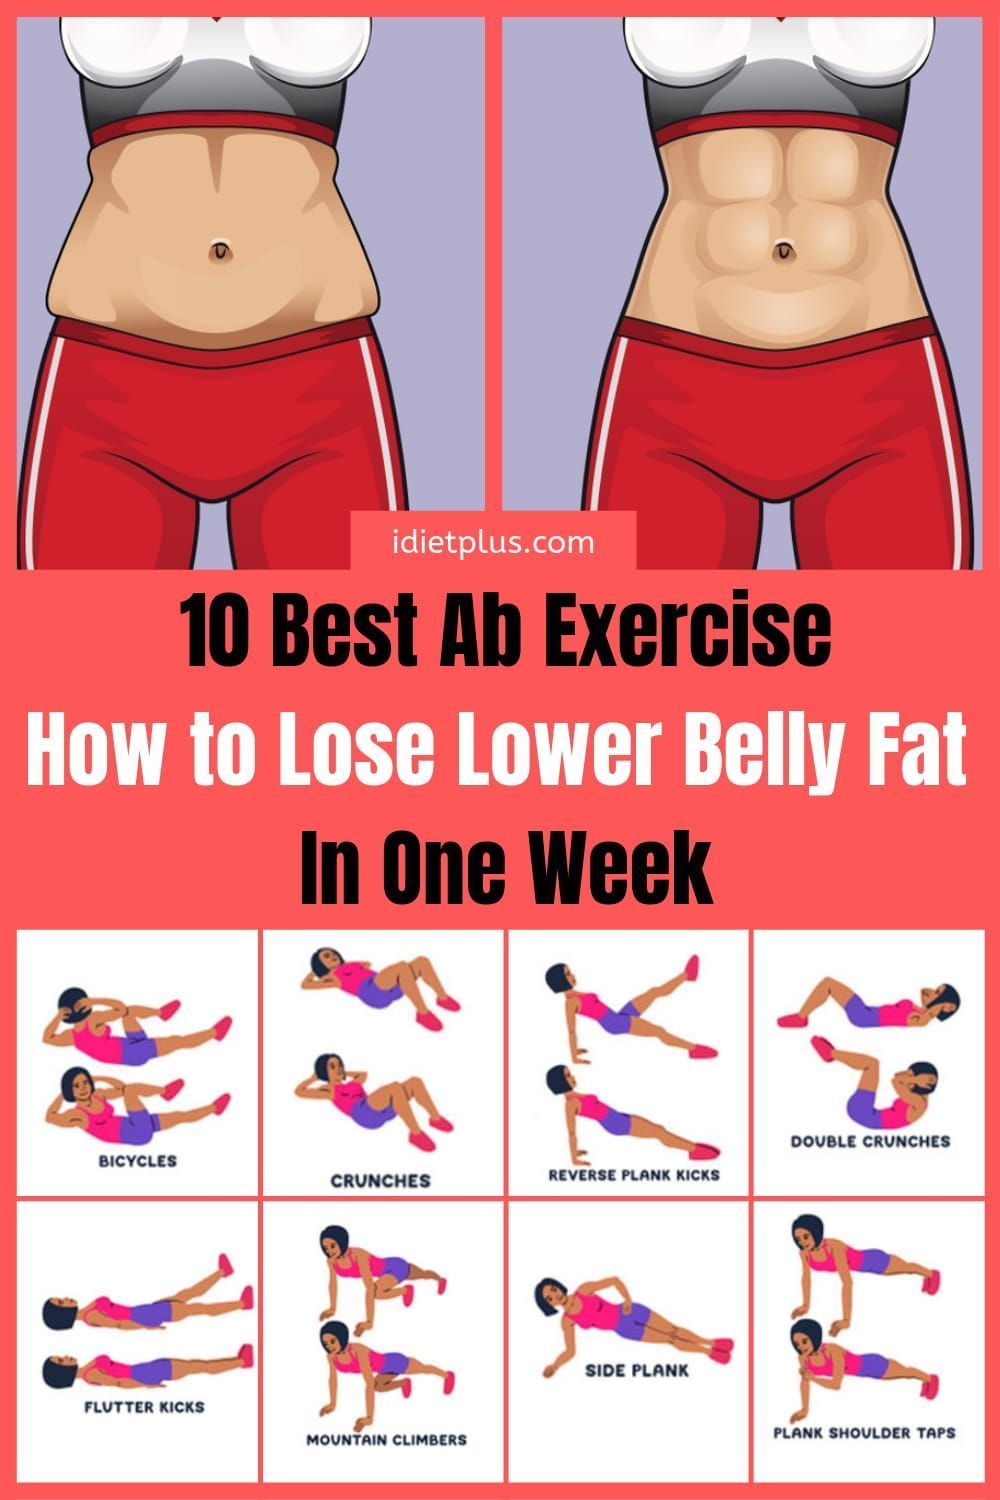 10 Best Ab Exercise - How to Lose Lower Belly Fat in One Week -   13 diet Easy 12 weeks ideas